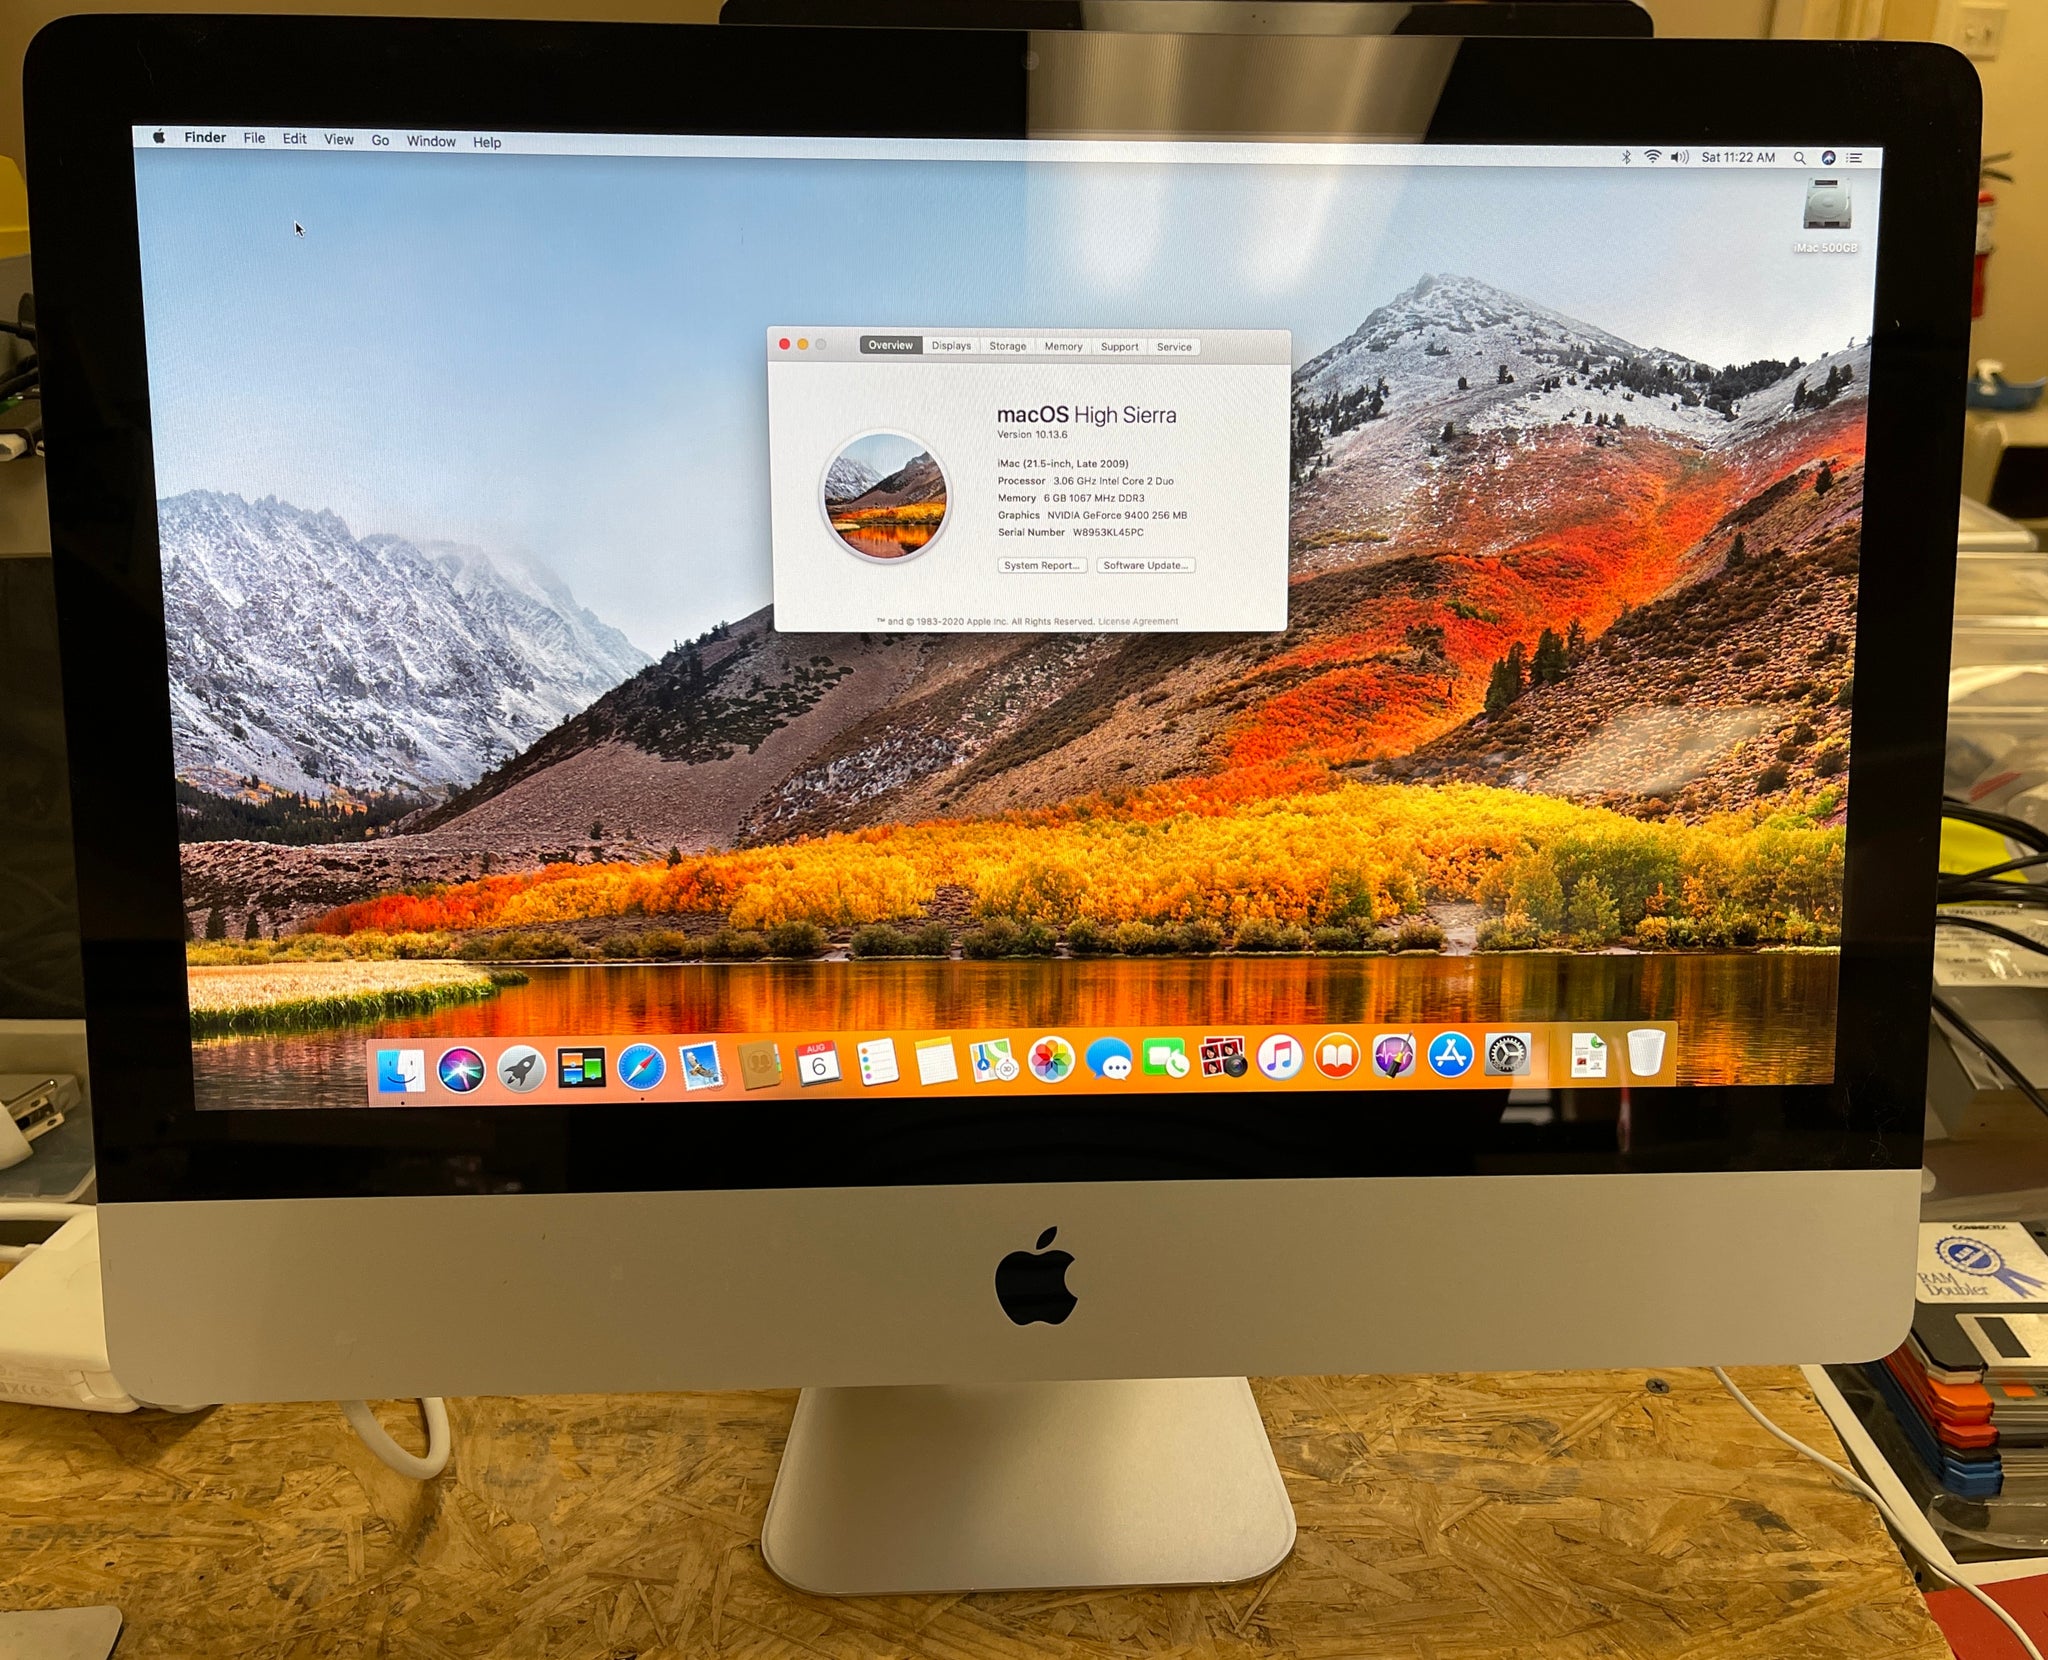 Apple iMac 21.5-inch Late 2009 3.06GHz Intel Core 2 Duo (MB950LL/A